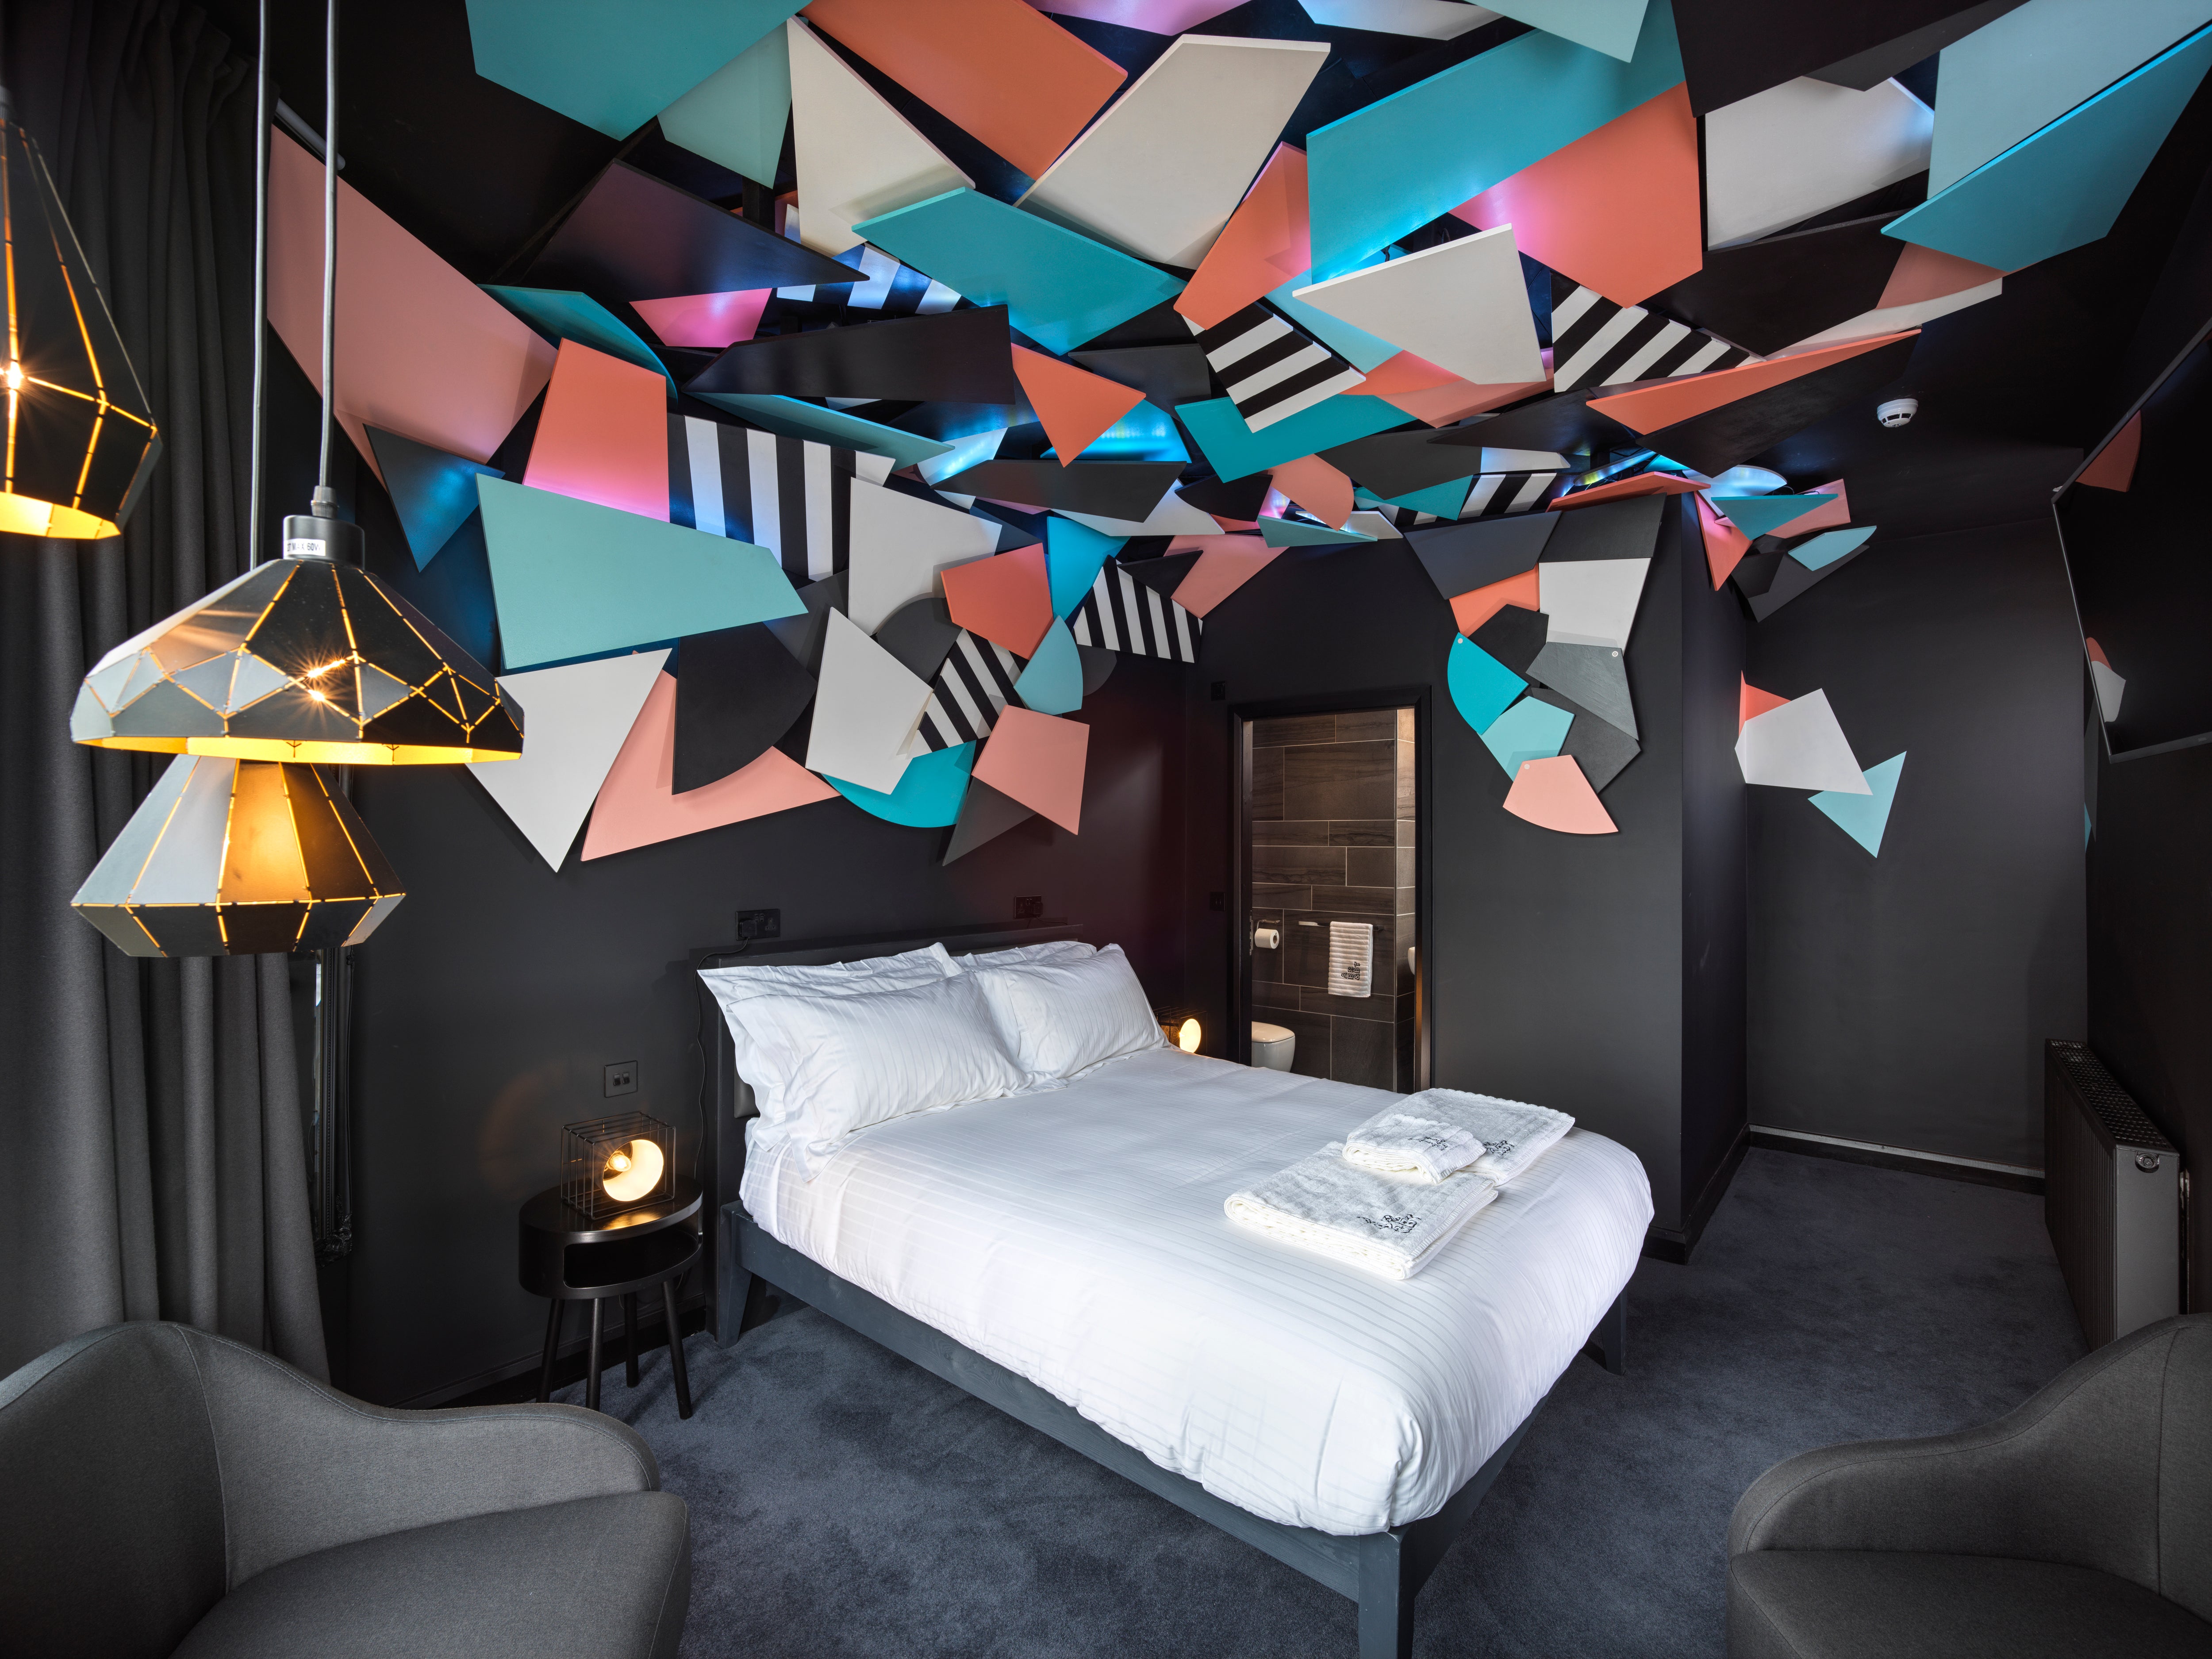 Each room at this classic Victorian hotel has been transformed by an artist